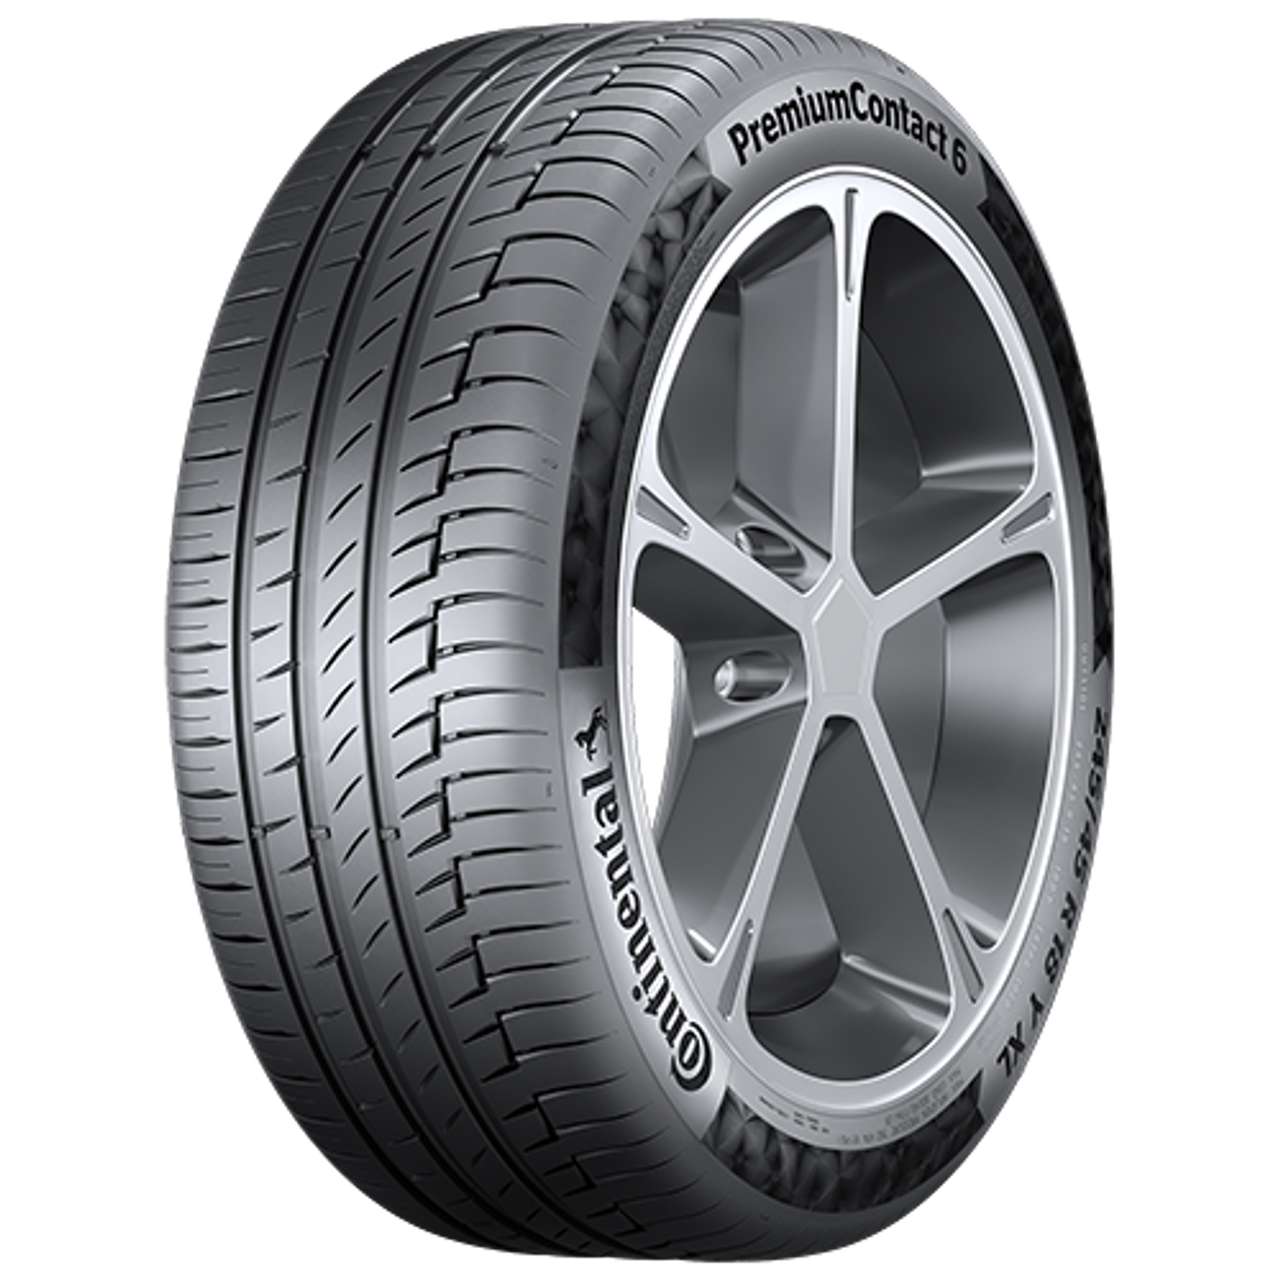 CONTINENTAL PREMIUMCONTACT 6 (EVc) 195/65R15 91V BSW